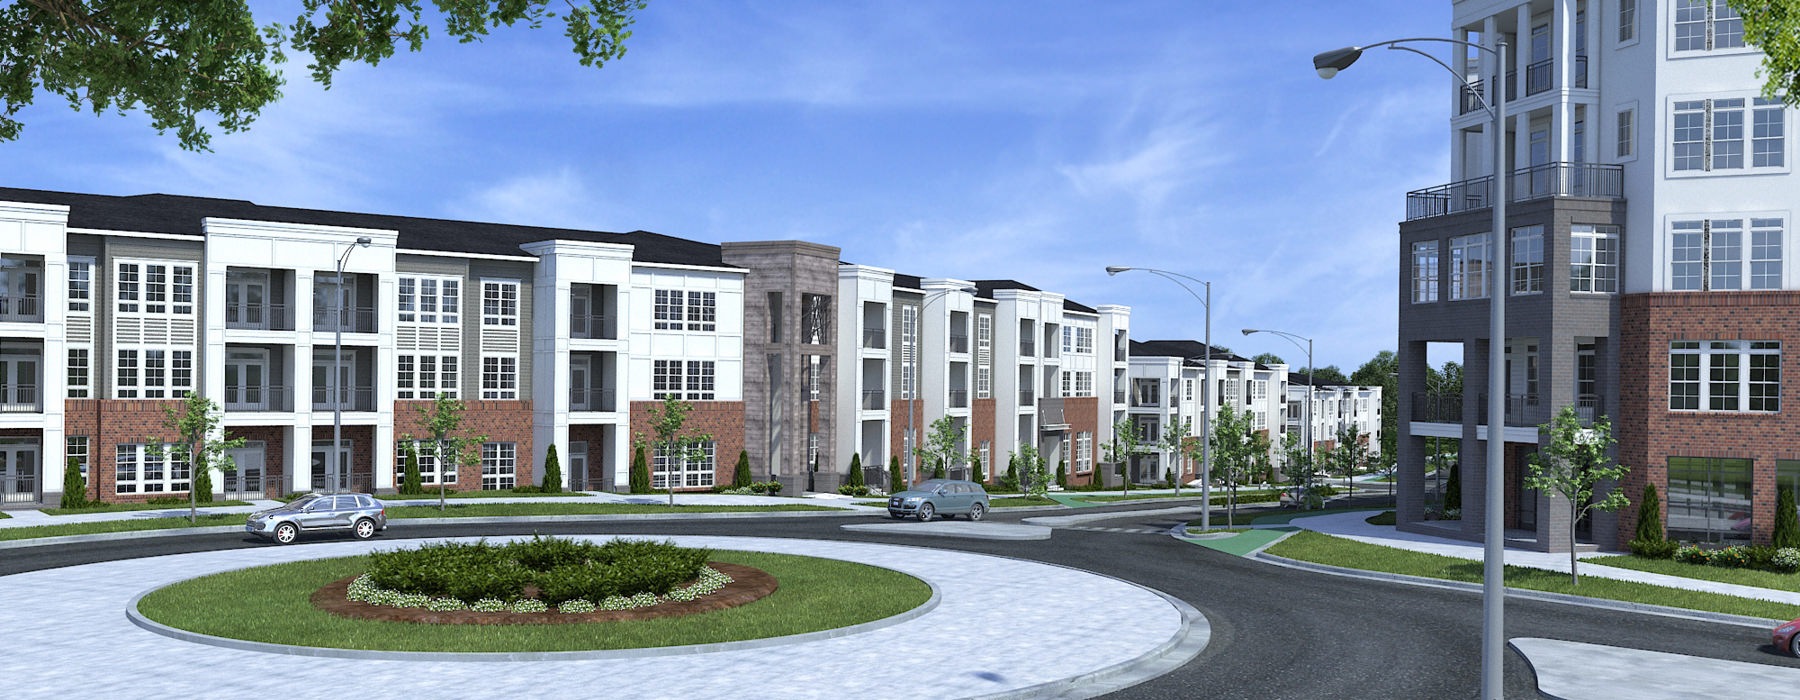 Rendering of The Hartley at Blue Hill